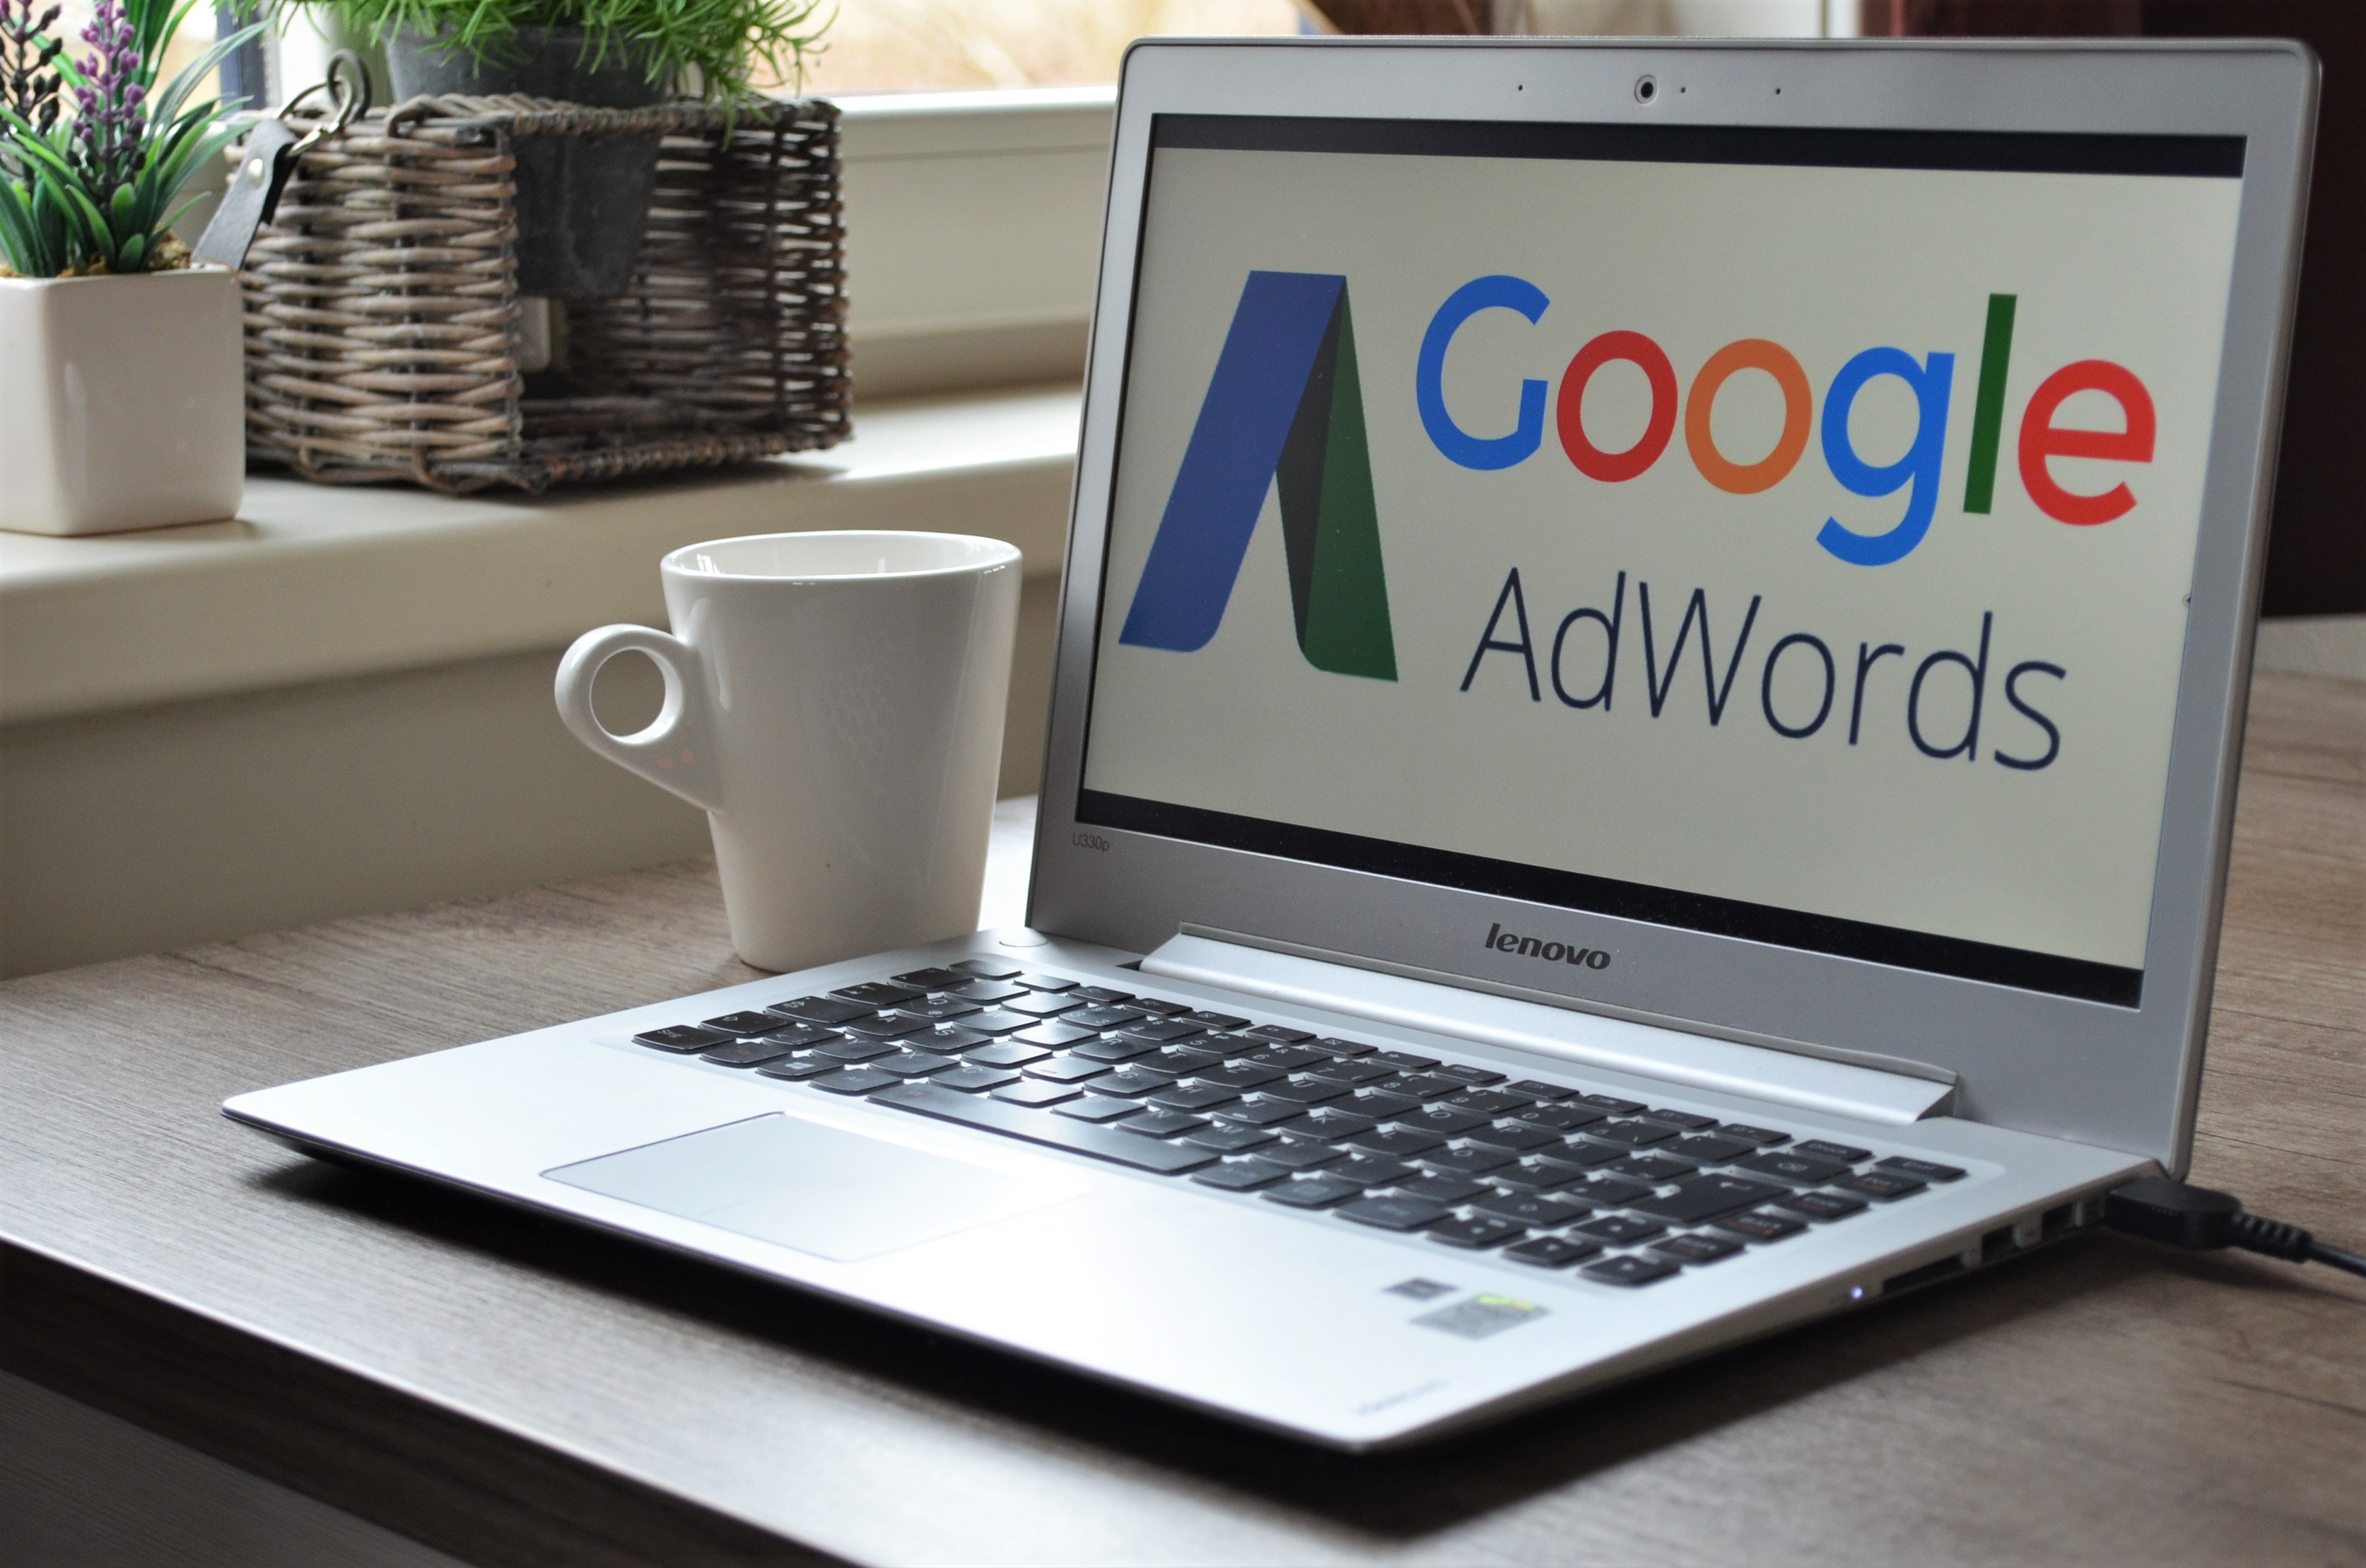 Why Google Adwords Attracts More Customers